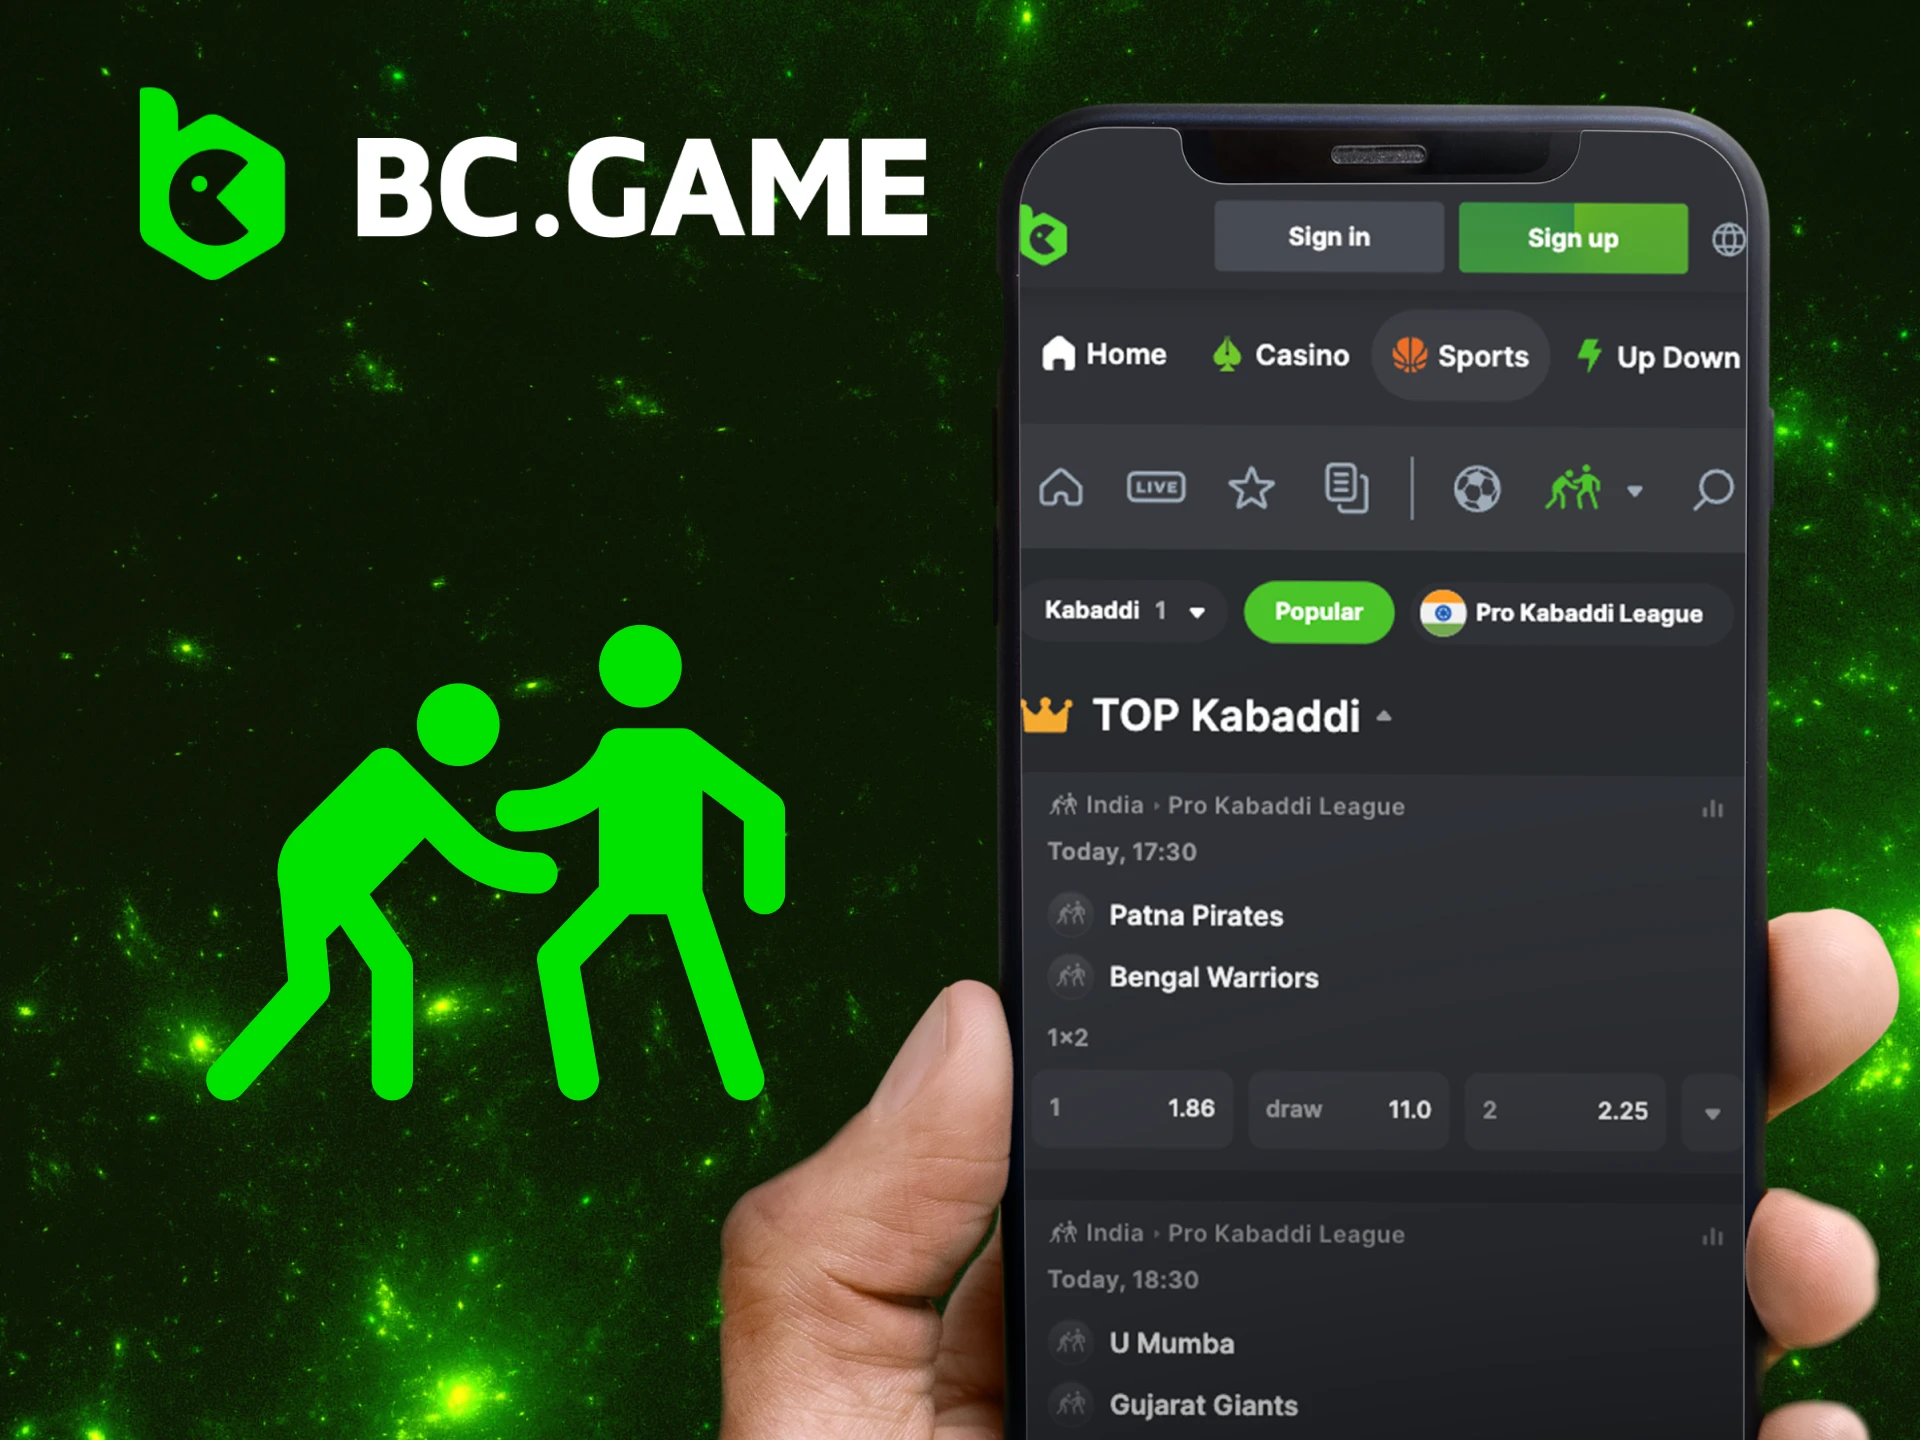 What are the most popular kabaddi events on the BC Game website.